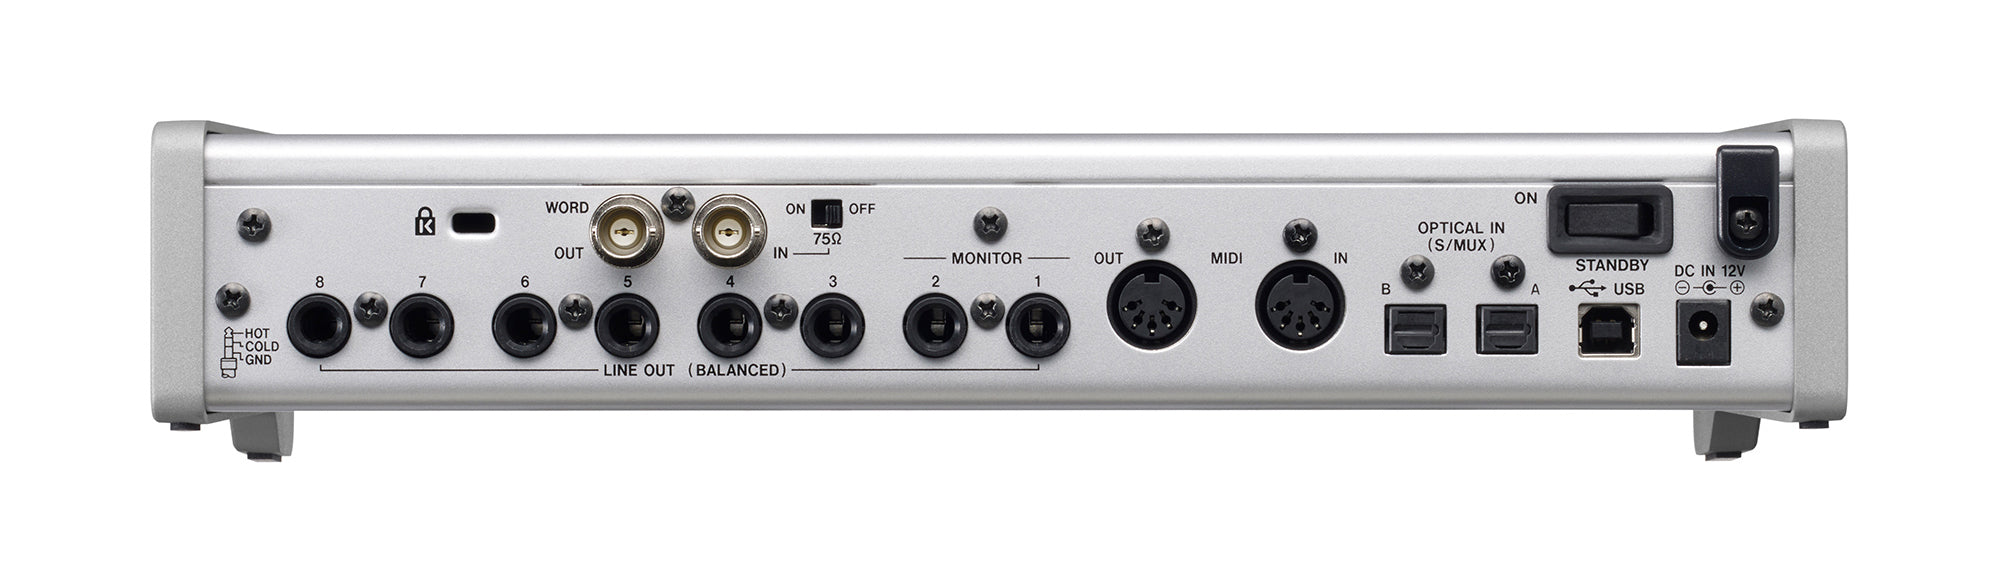 Tascam US-16x08 16-In, 8-Out USB 2.0 Audio/MIDI interface 